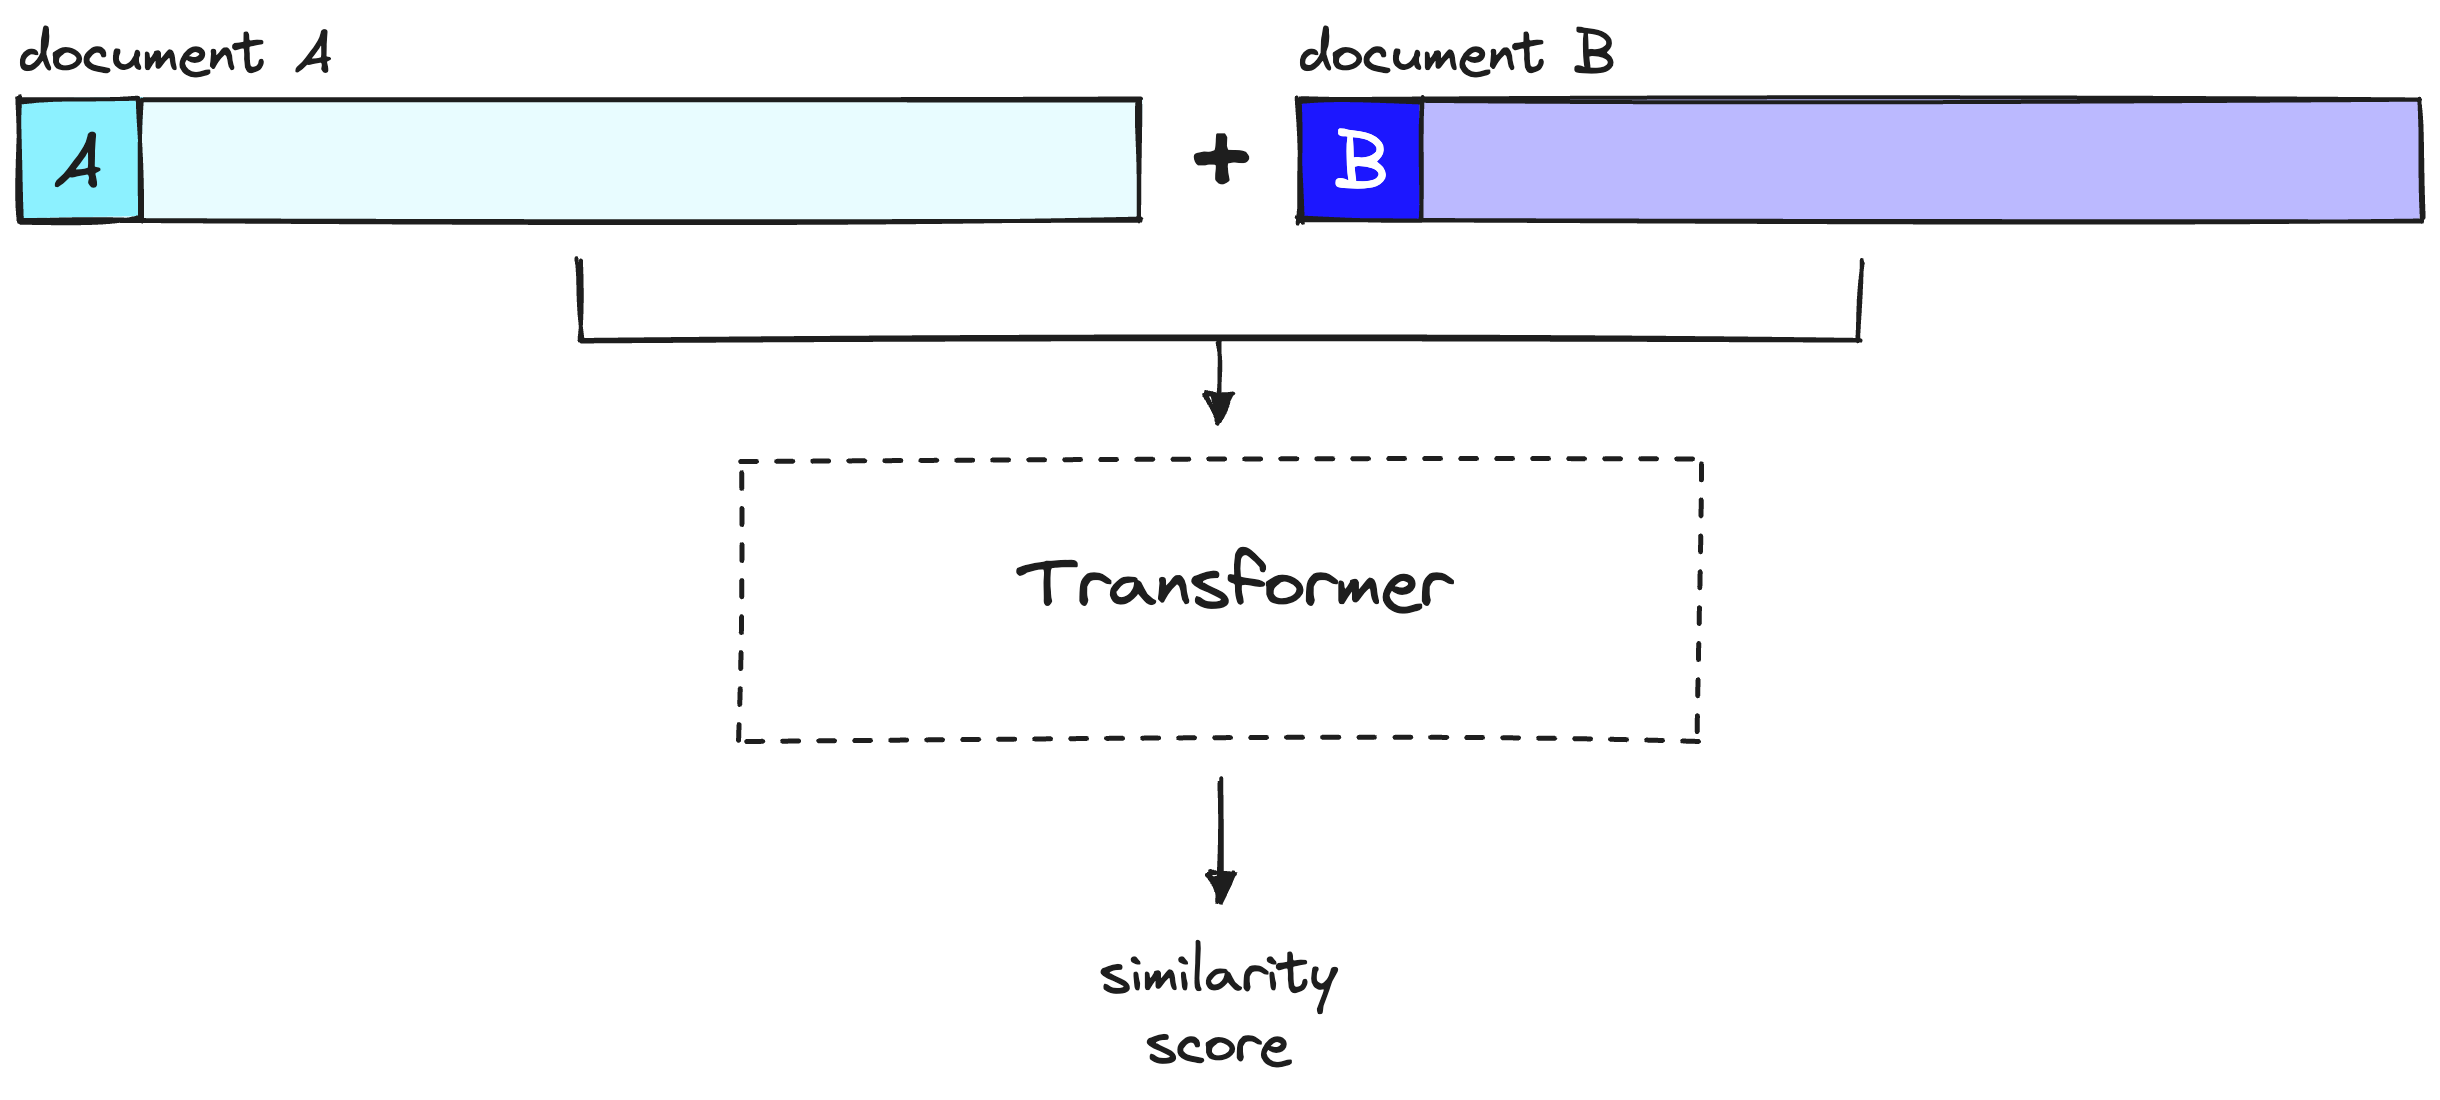 A reranker considers query and document to produce a single similarity score over a full transformer inference step. Note that document A here is equivalent to our query.